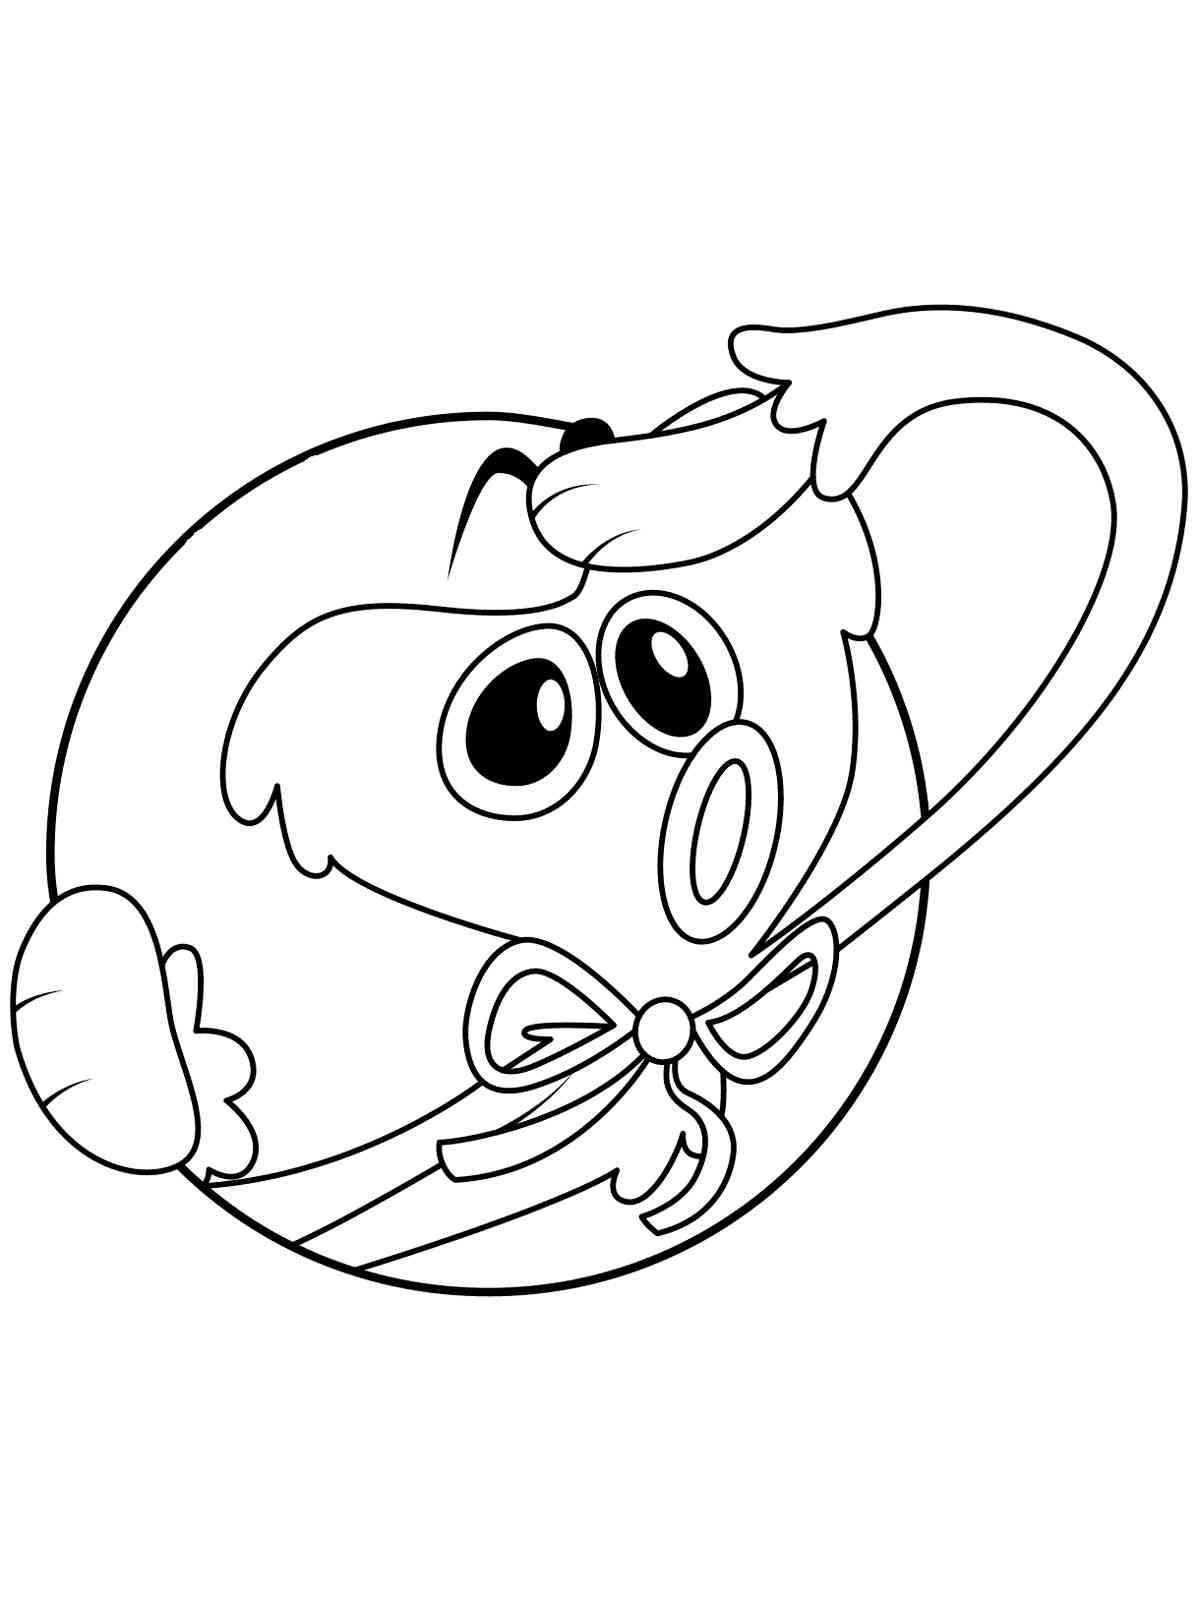 Poppy Playtime Huggy Wuggy 2 coloring page